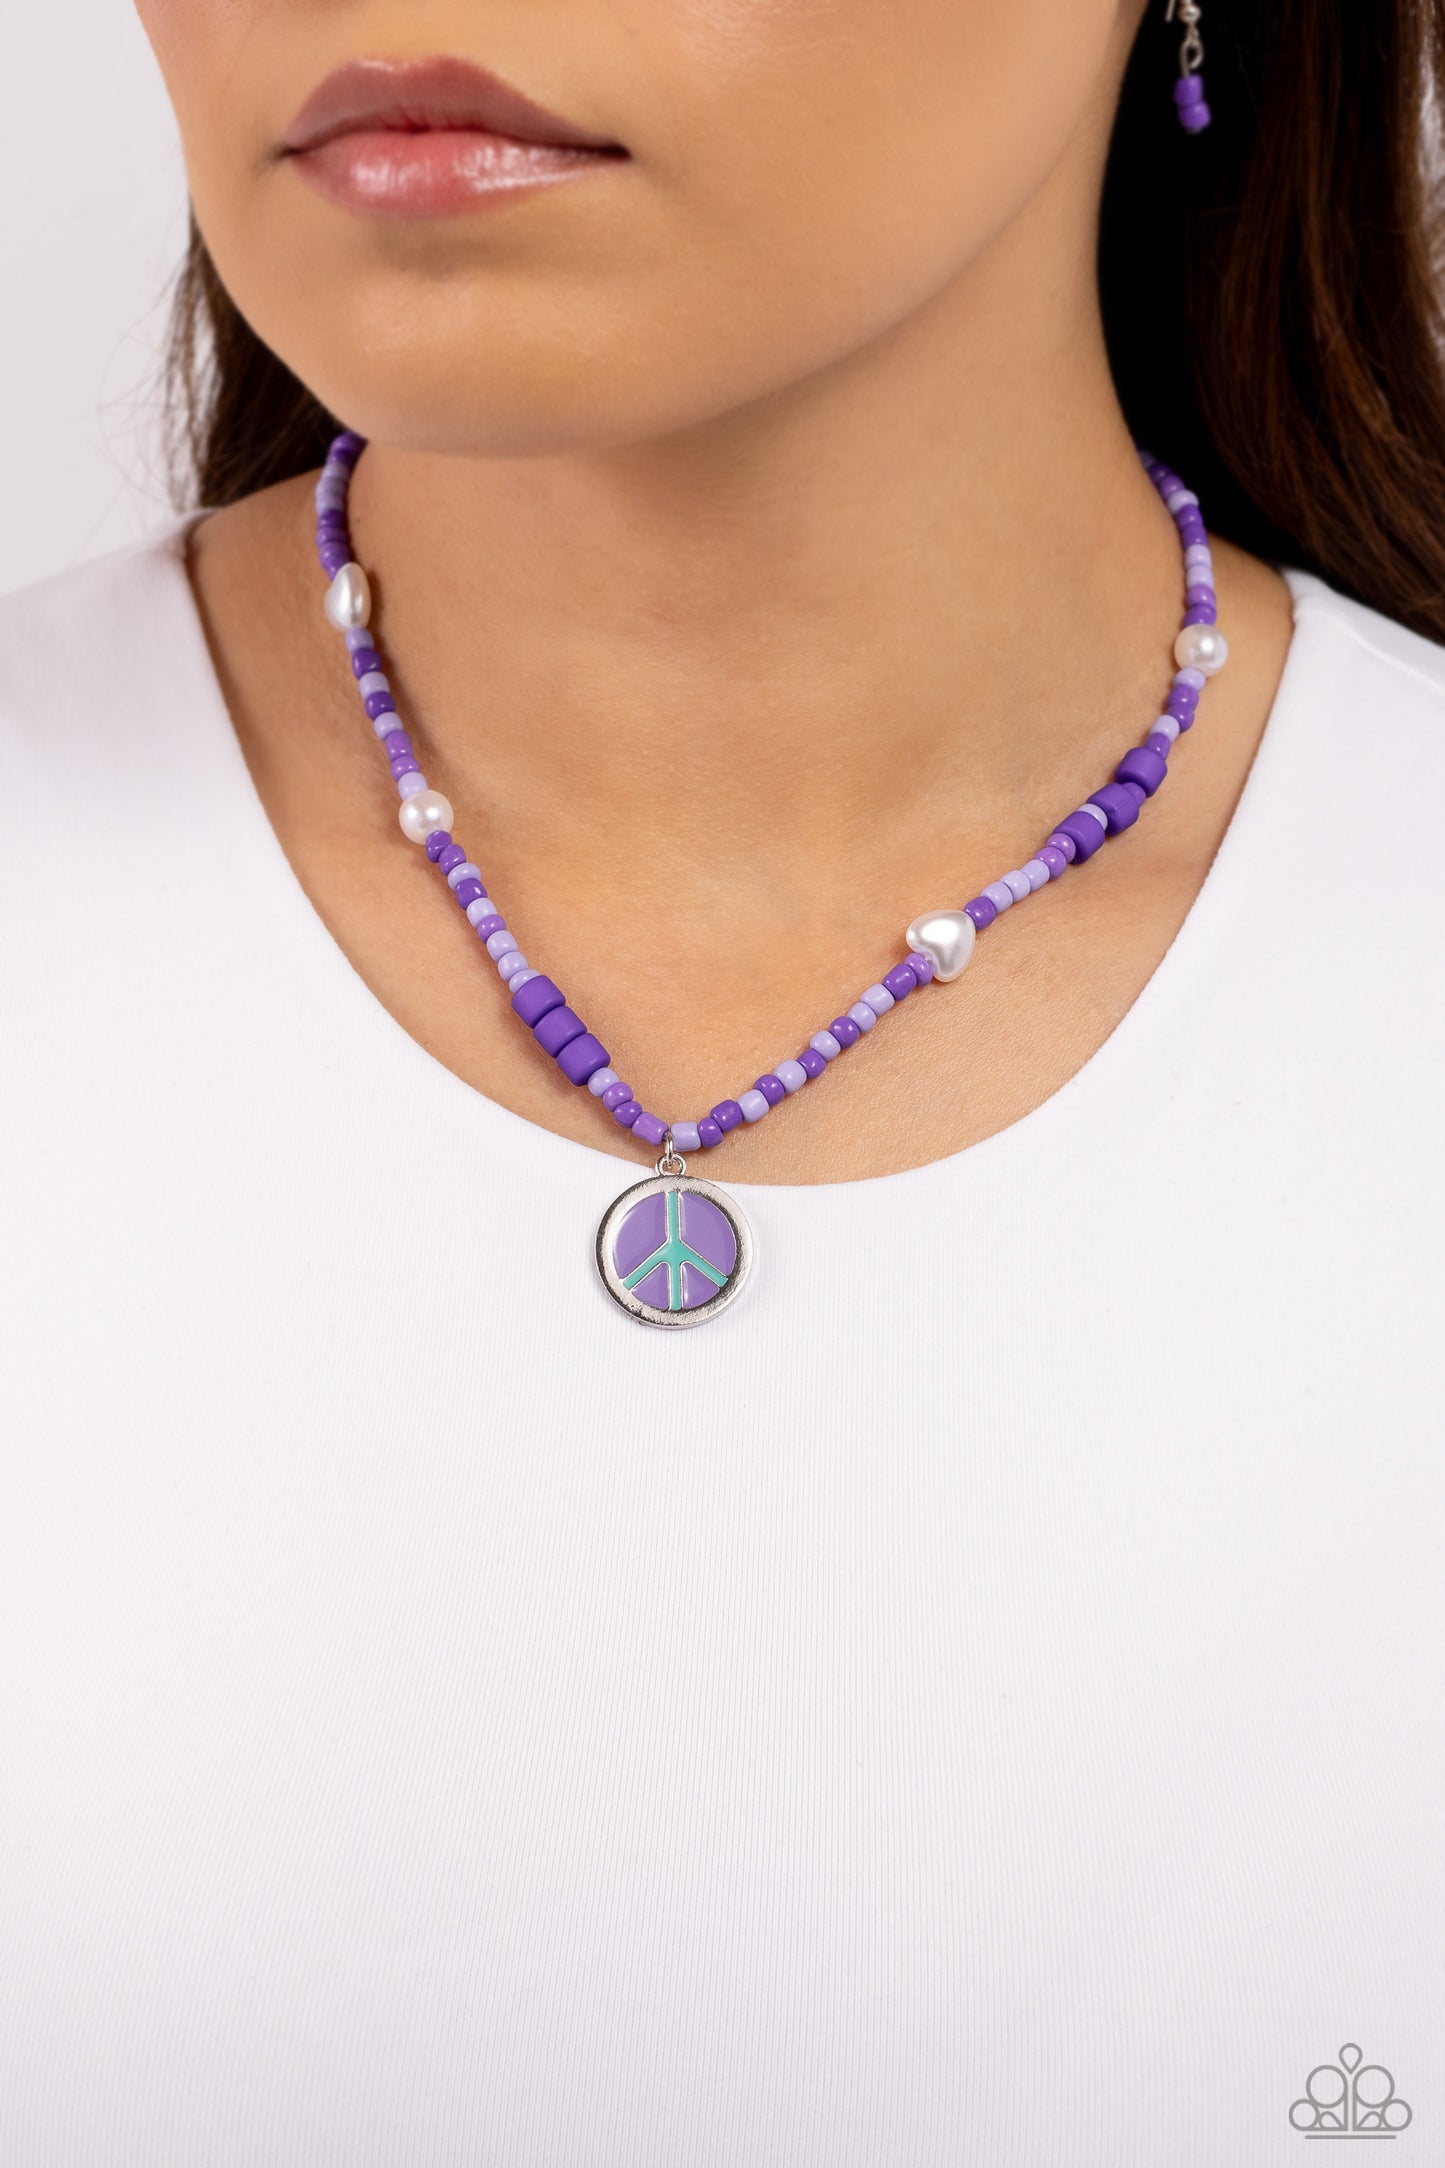 Pearly Possession Purple Necklace - Paparazzi Accessories  Infused along an invisible string, lavender, plum, and purple seed beads combine with sporadically placed purple discs, and glossy white and heart-shaped pearls for a vibrant pop of color along the neckline. A silver peace sign featuring blue and purple paint dangles from the colorful strand for a groovy finish. Features an adjustable clasp closure.  Sold as one individual necklace. Includes one pair of matching earrings.  P2DA-PRXX-141XX